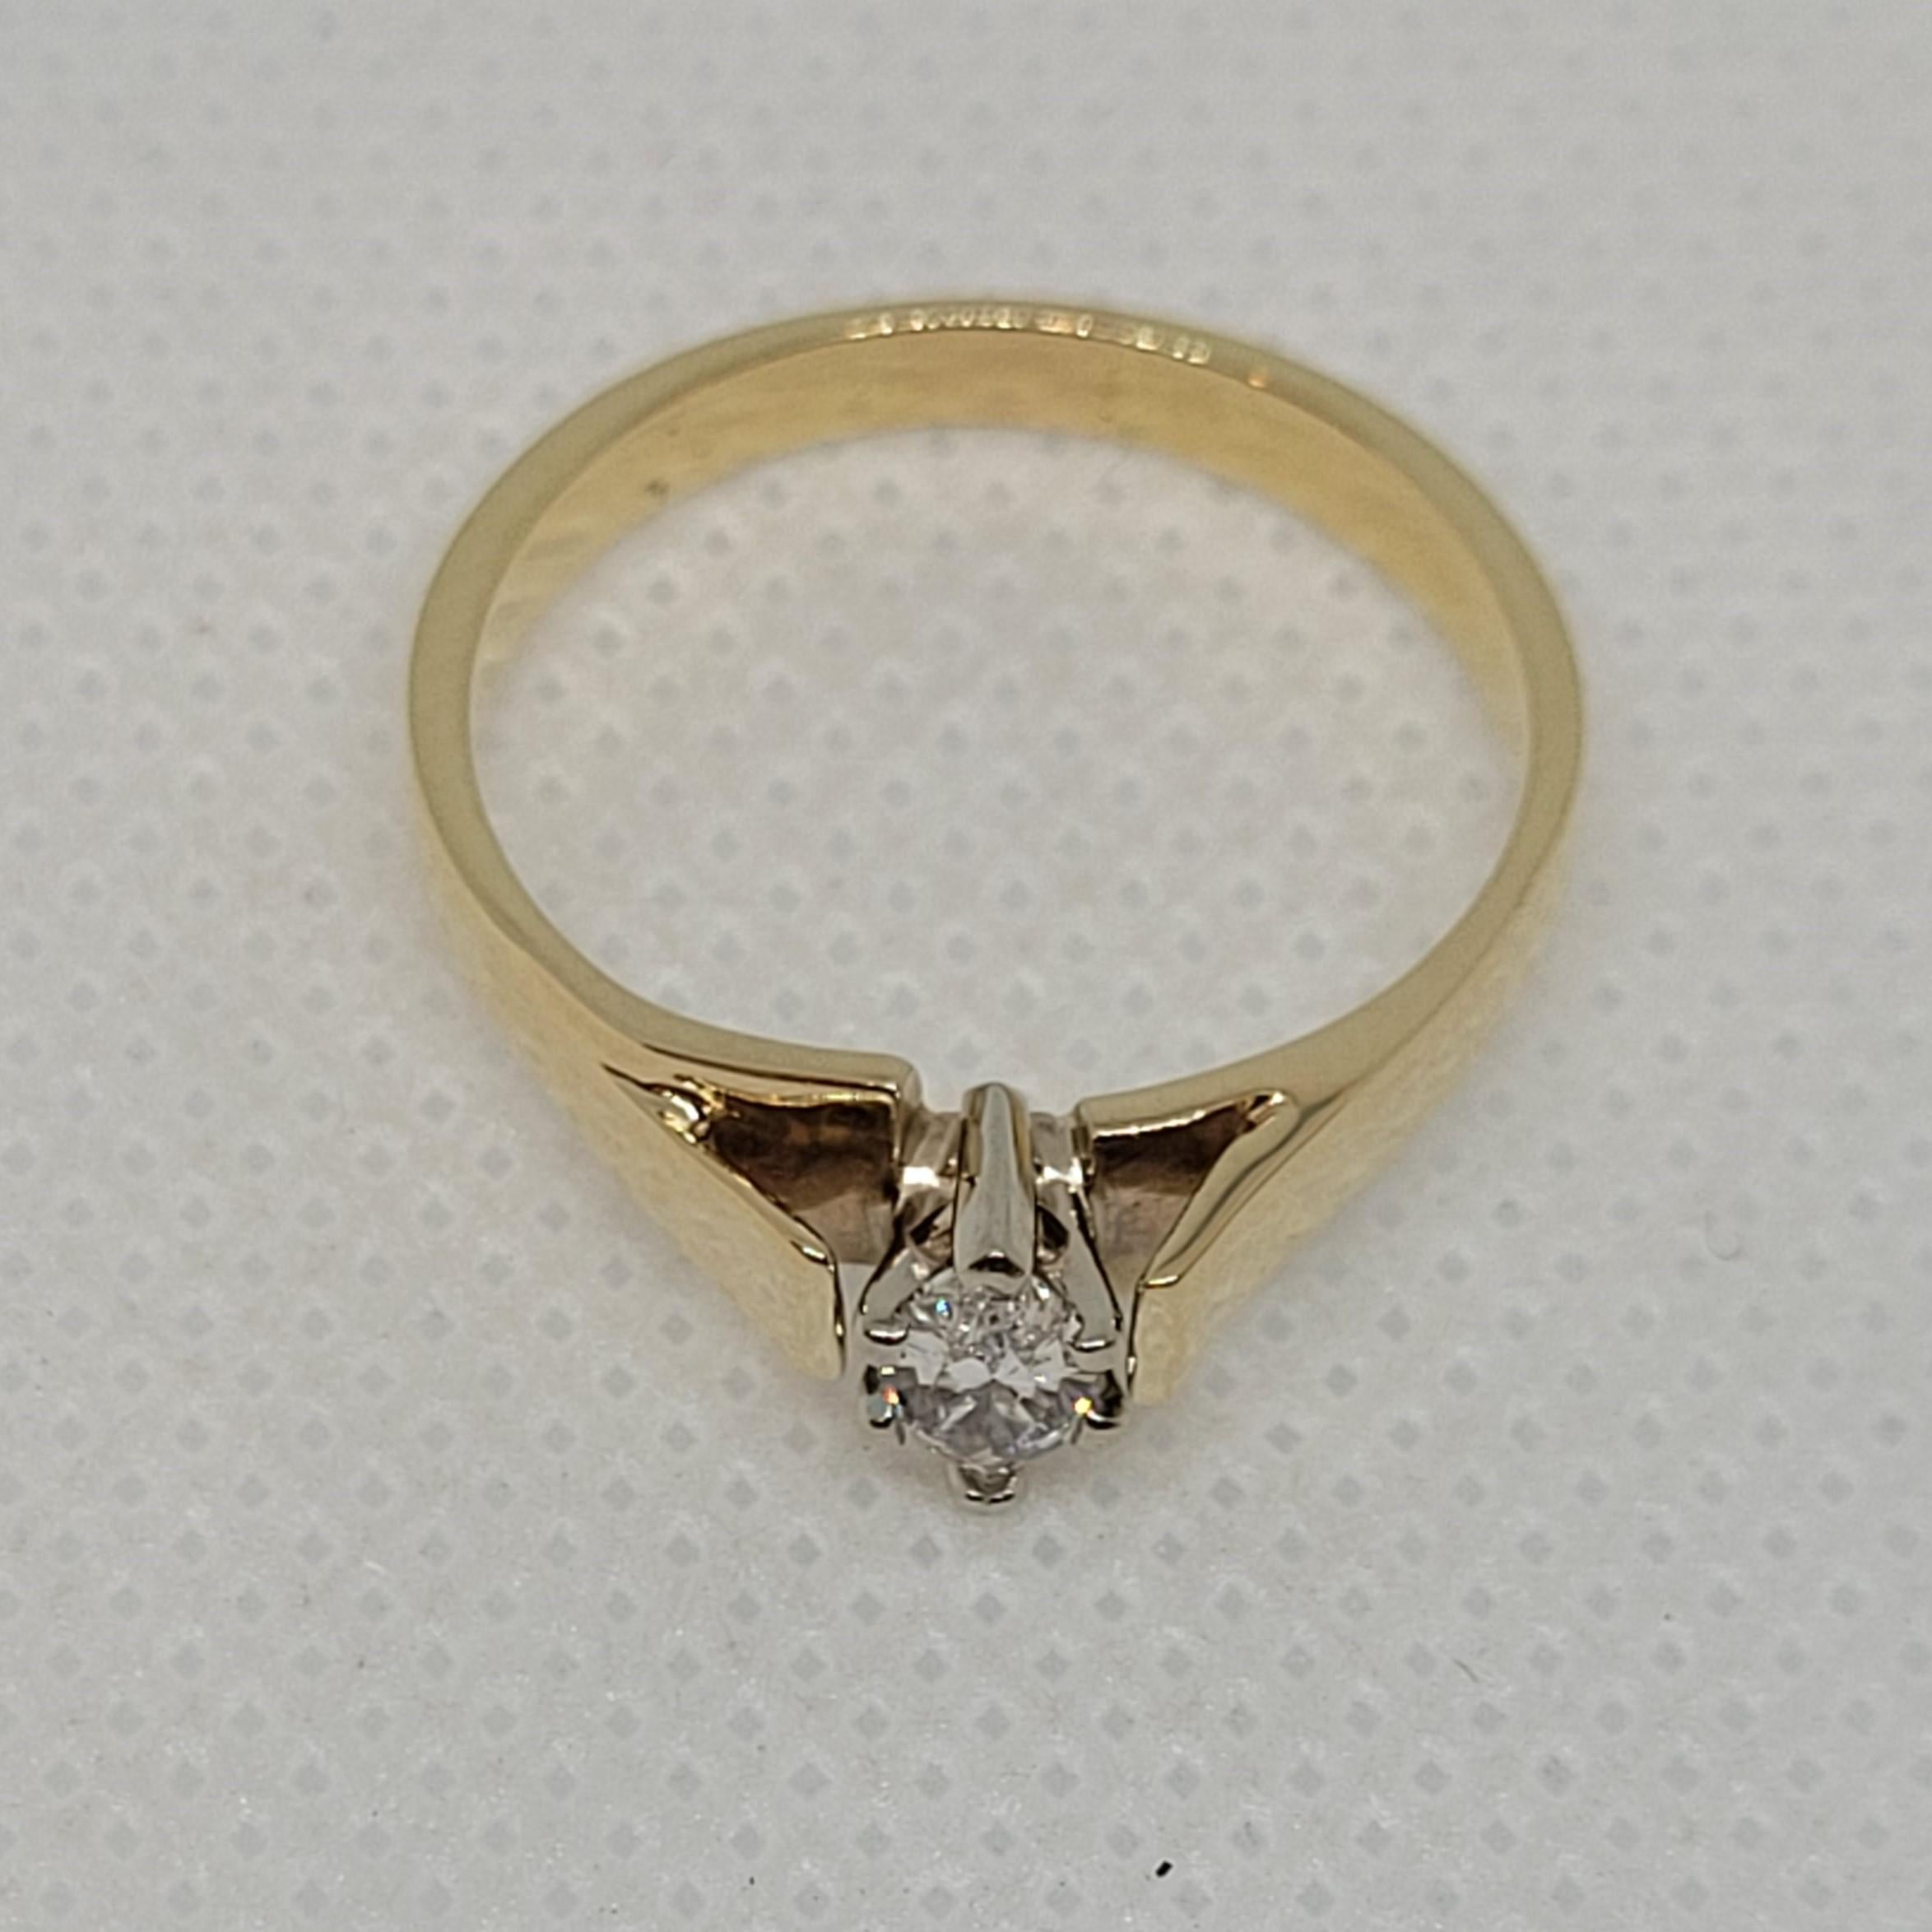 Classic 14kt yellow gold cathedral-style ring with a six prong 14kt white gold head holding a .25ct marquis cut diamond. The diamond is H in color and SI in clarity with a good cut. The ring weighs 3.1 grams, is 7.5 in size, and is 3mm tapering to